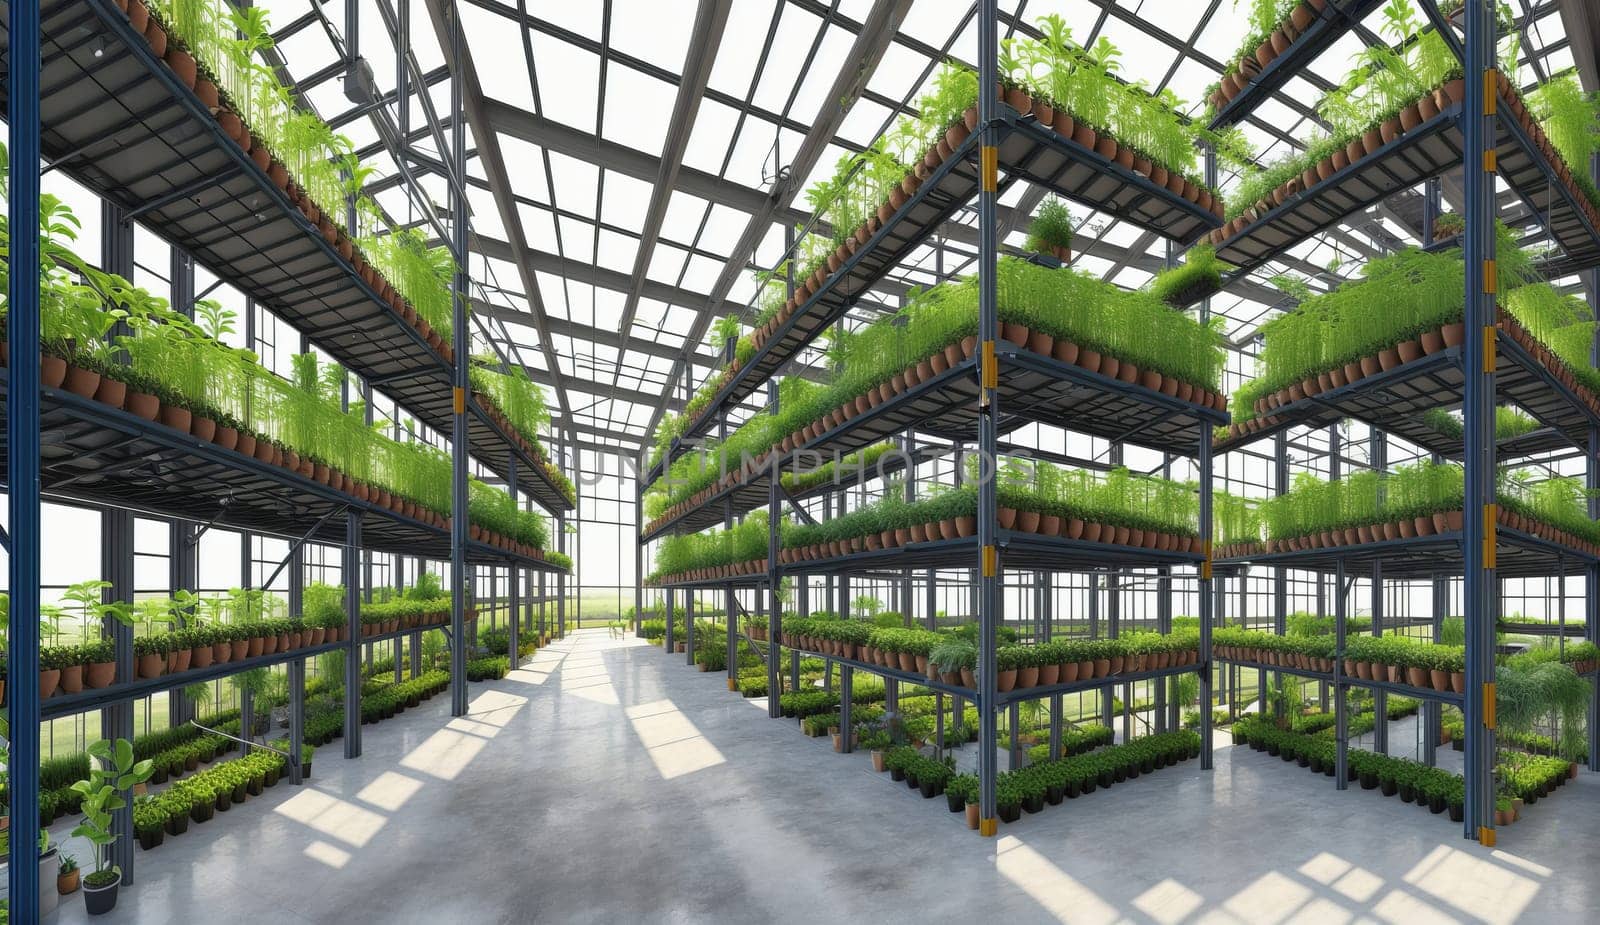 A vast building housing numerous shelves displaying a variety of terrestrial plants, creating a lush indoor biome with green fixtures